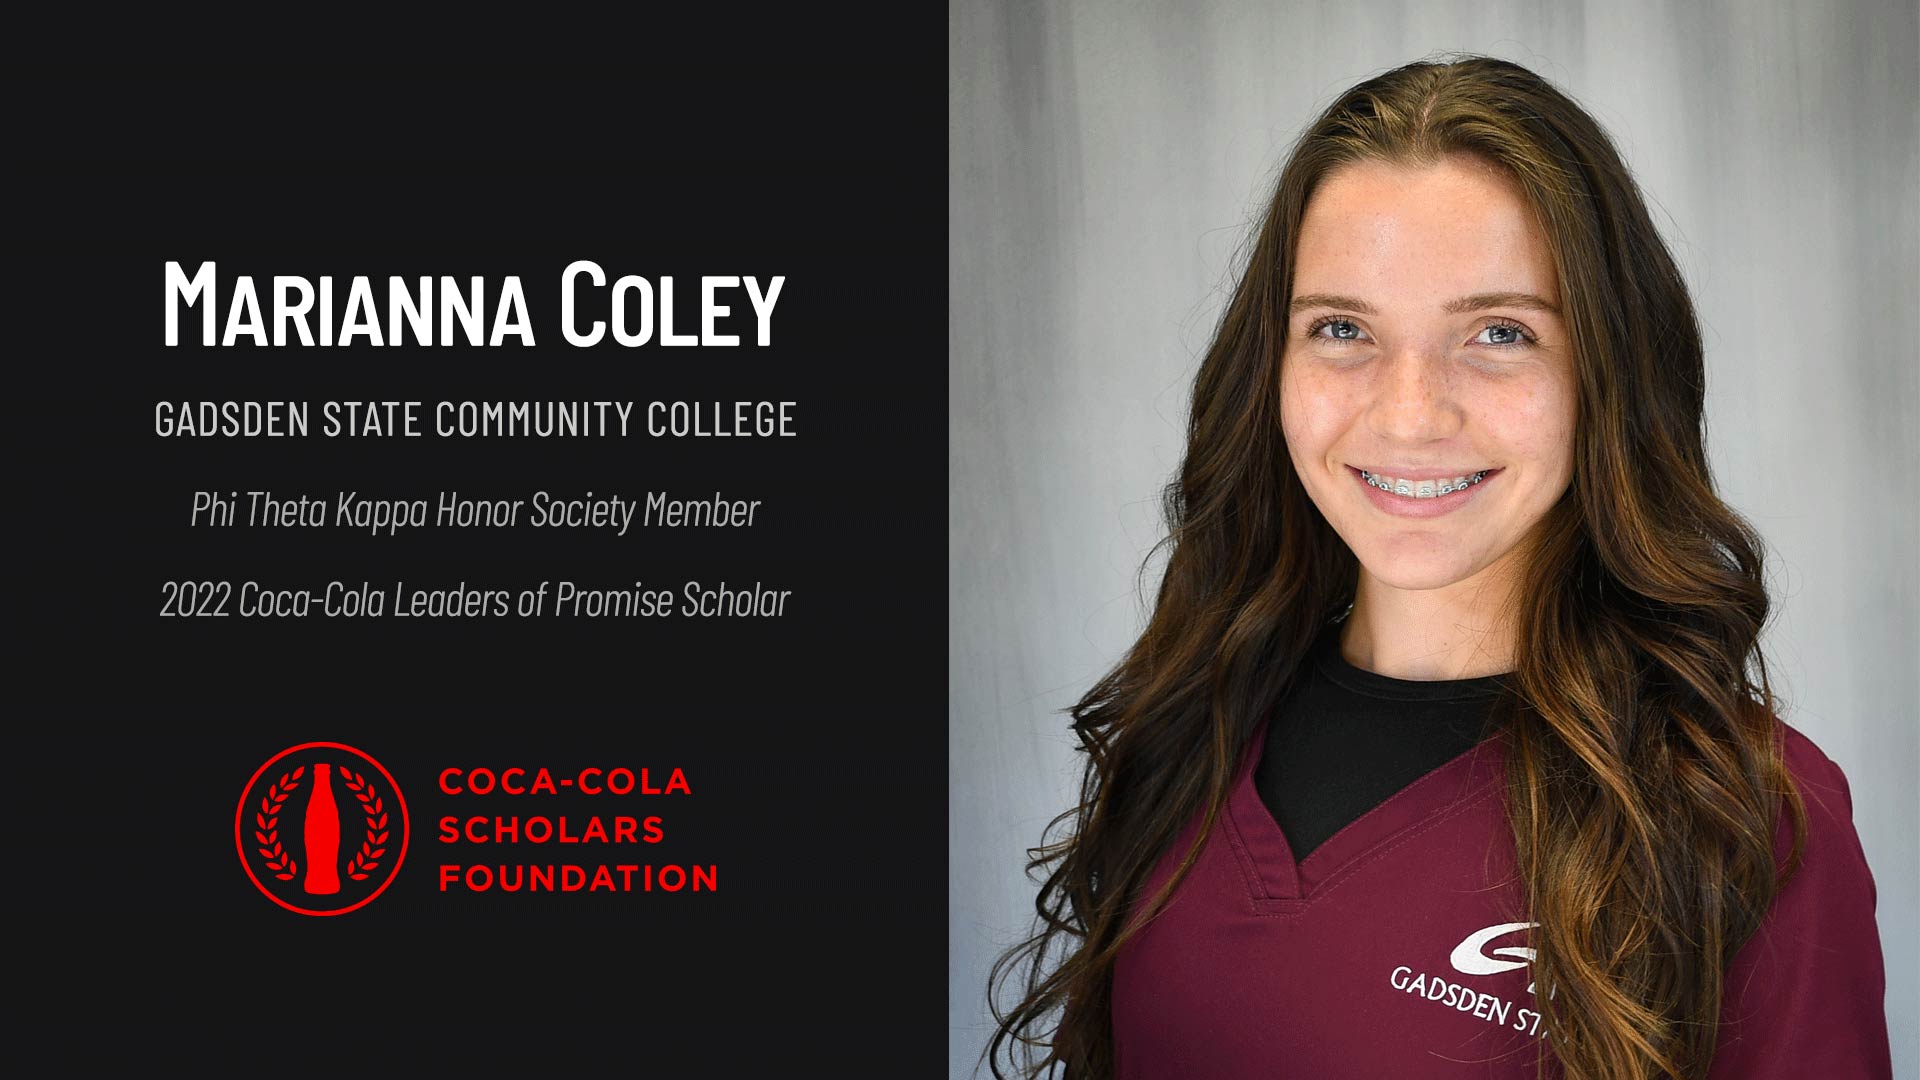 Photo of Marianna Coley, 2022 Coca-Cola Leaders of Promise Scholar